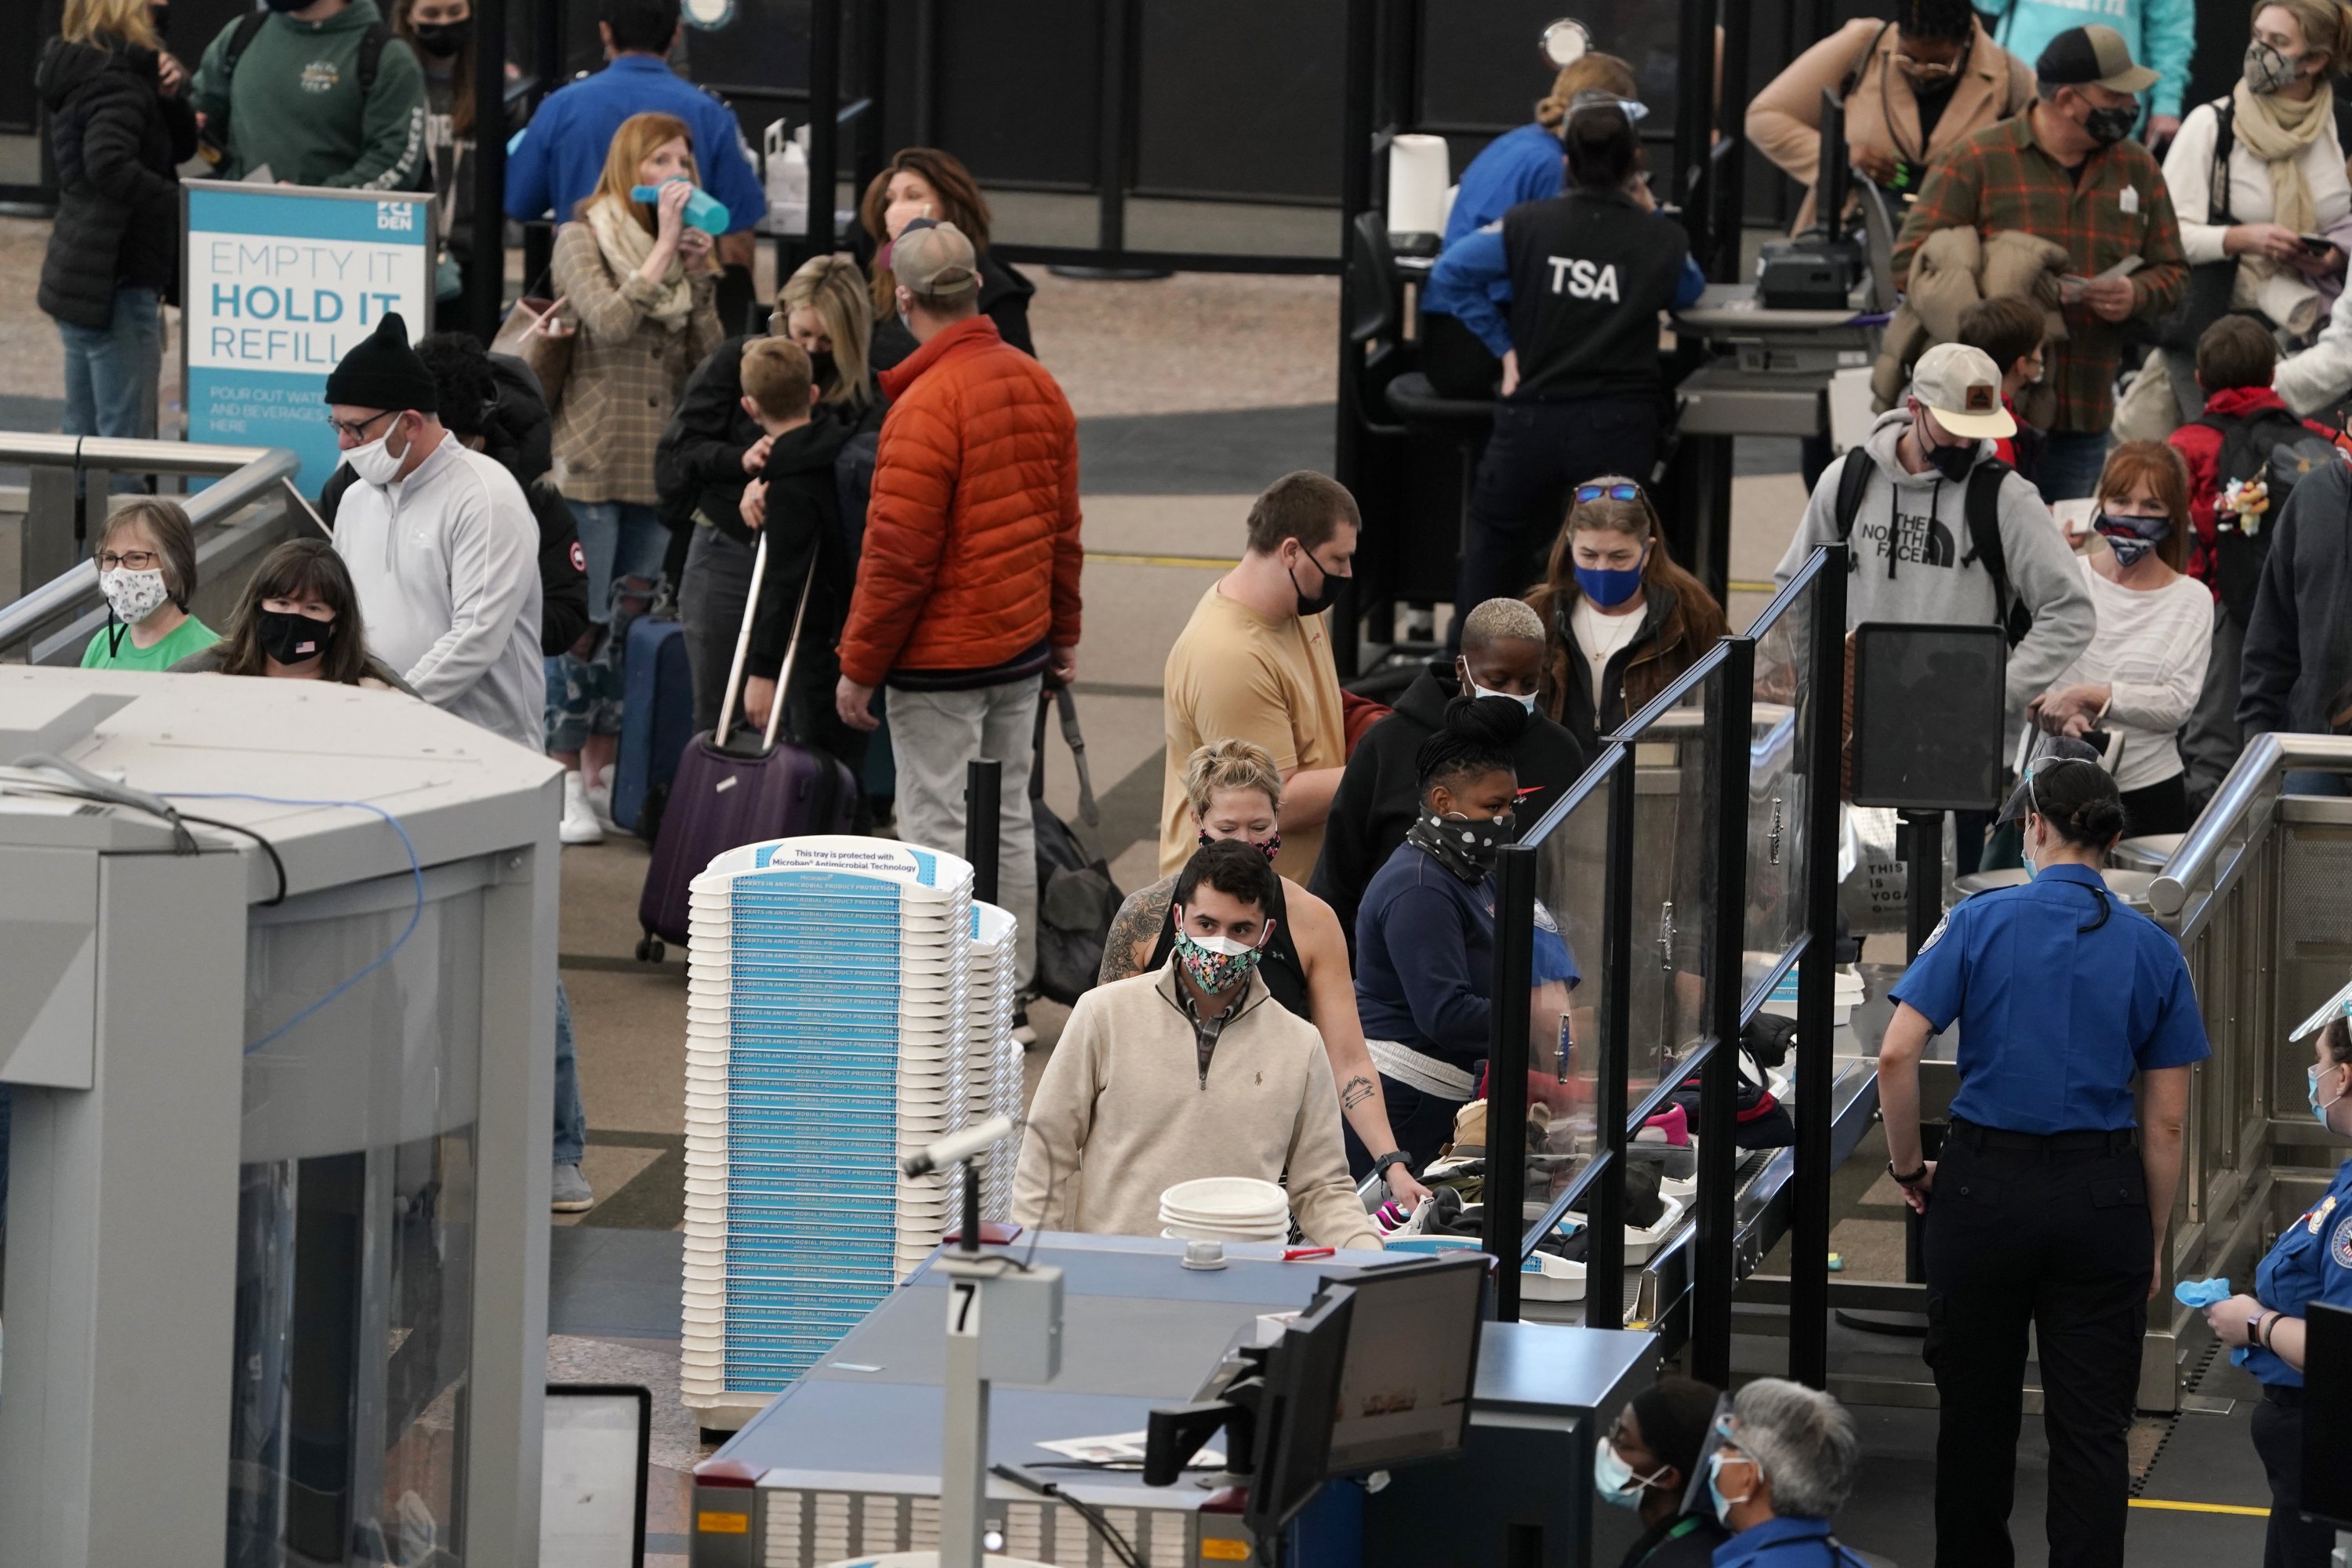 Airlines plan to ask passengers for contact tracing details